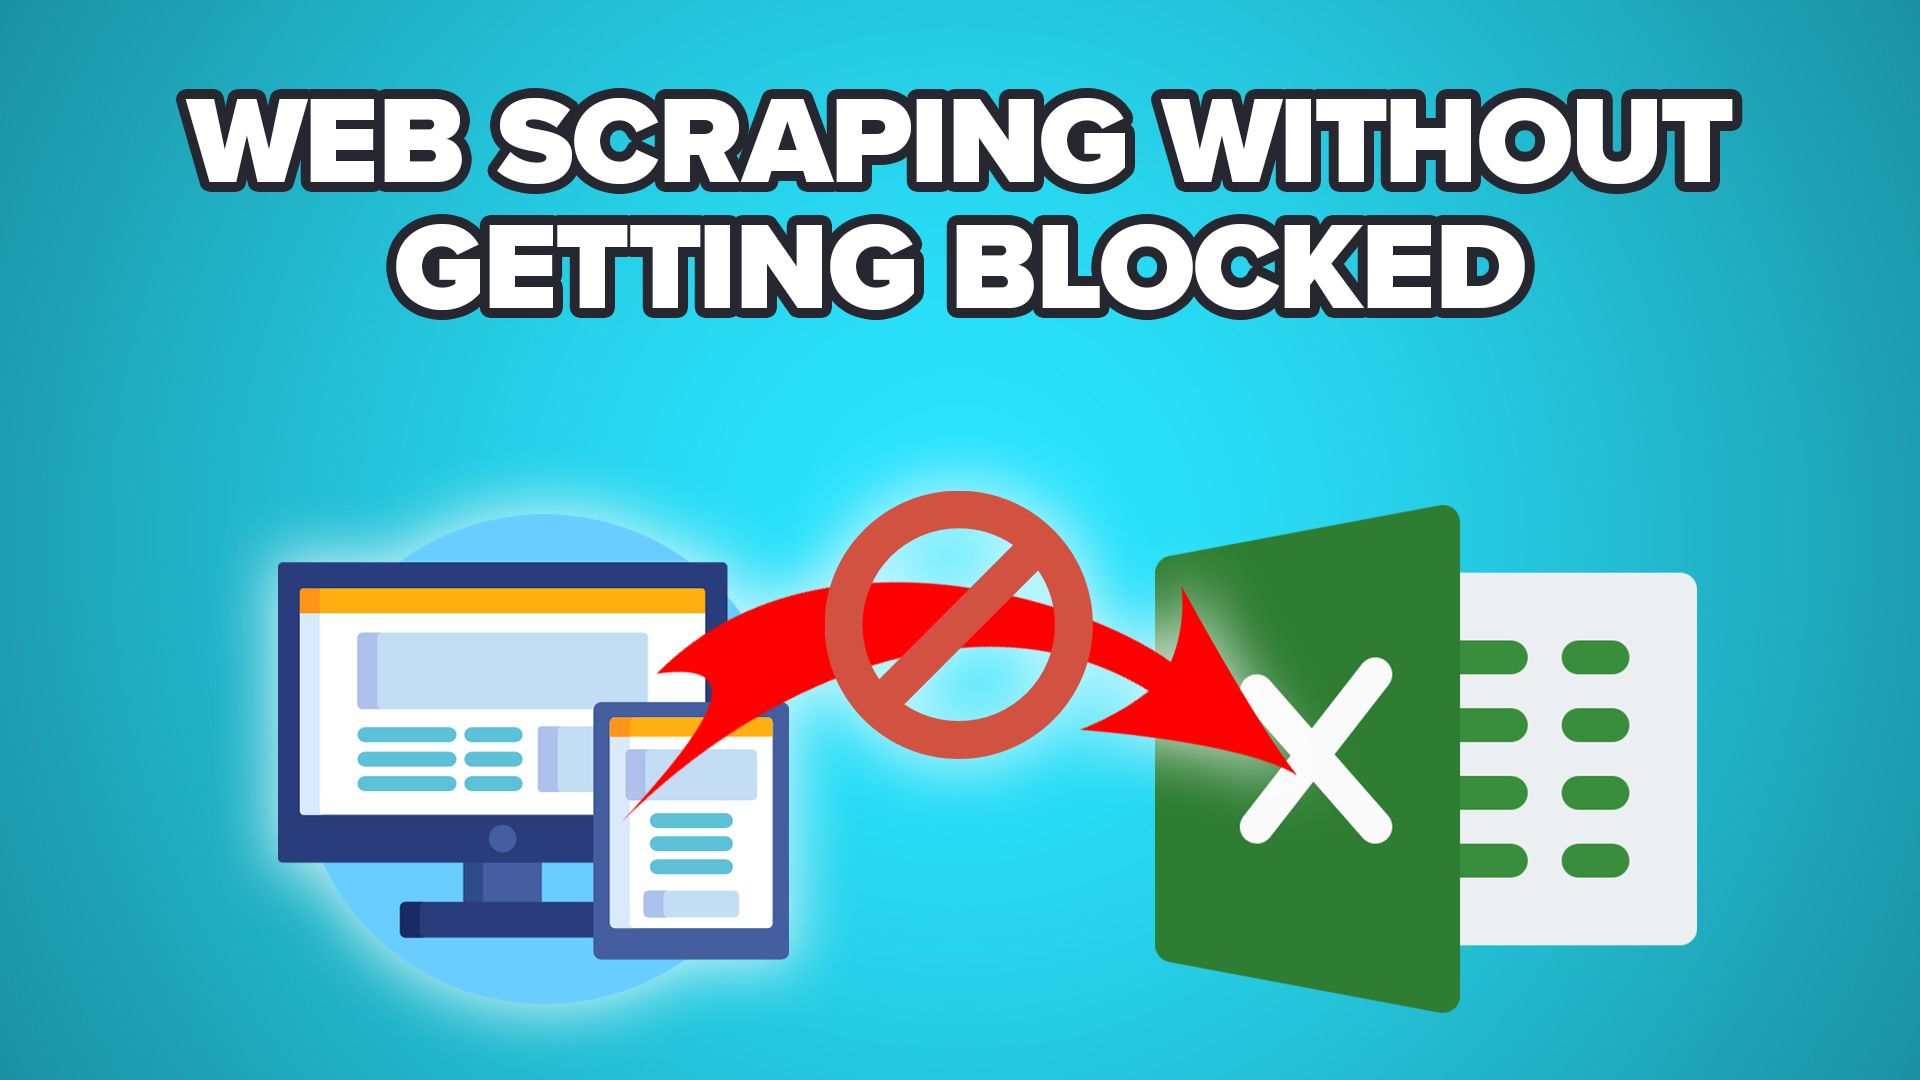 5 tips on web scraping without getting blocked